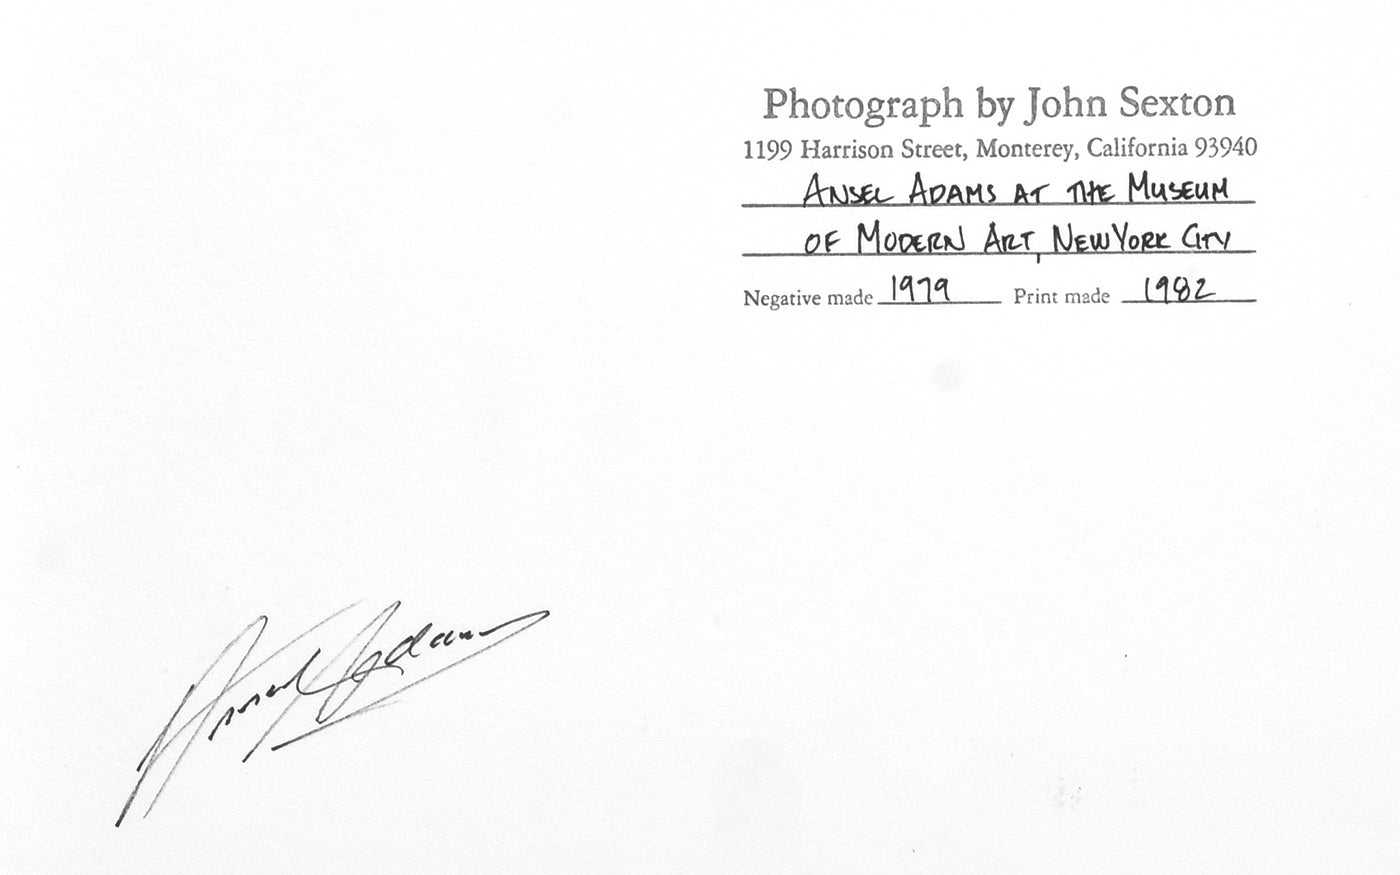 Ansel Adams at MOMA, 1979 by John Sexton - Signed by Adams & Sexton